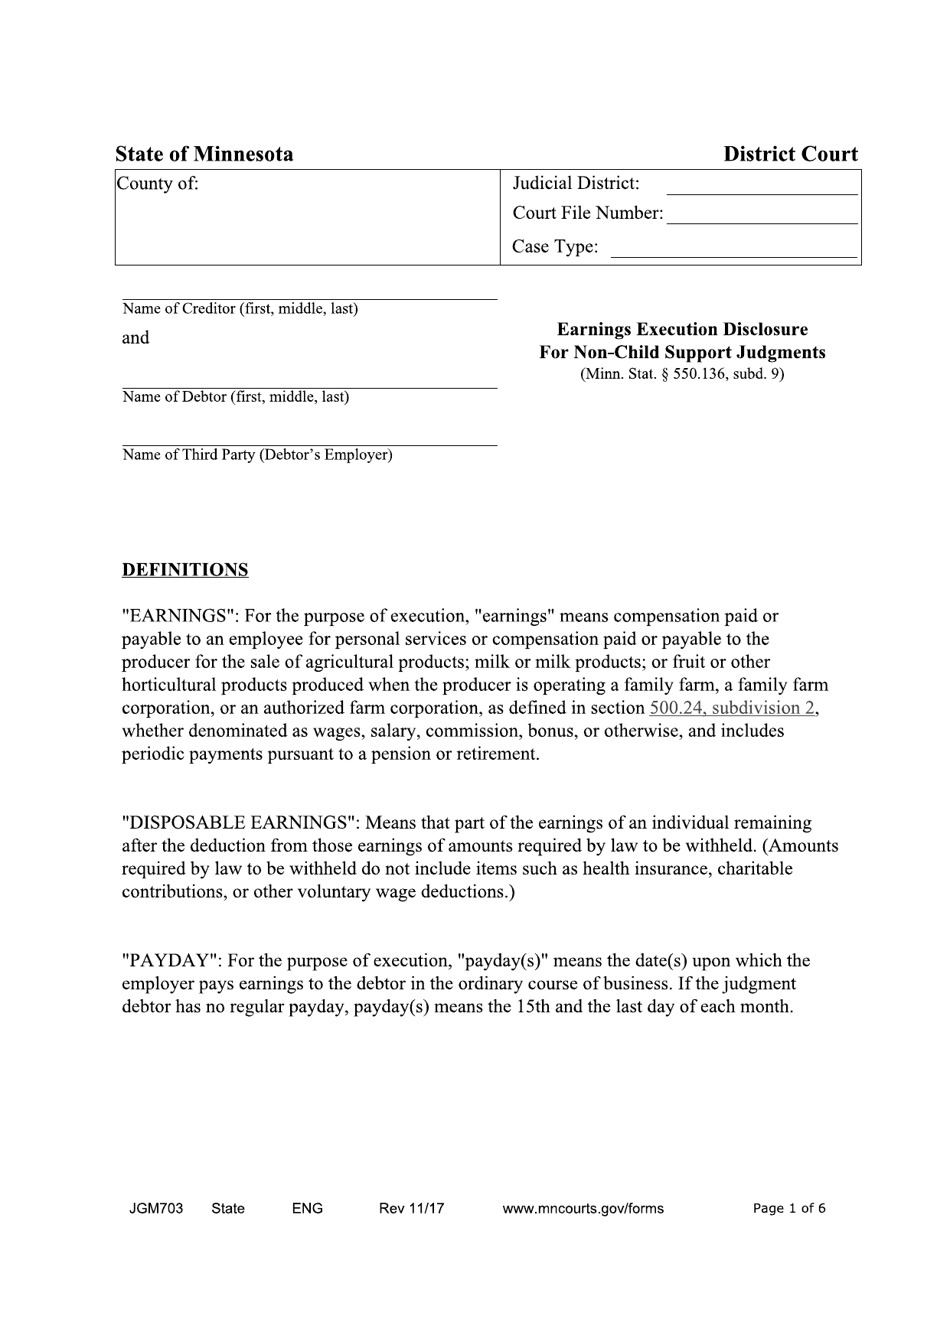 Form JGM703 Earnings Execution Disclosure for Non-child Support Judgments - Minnesota, Page 1